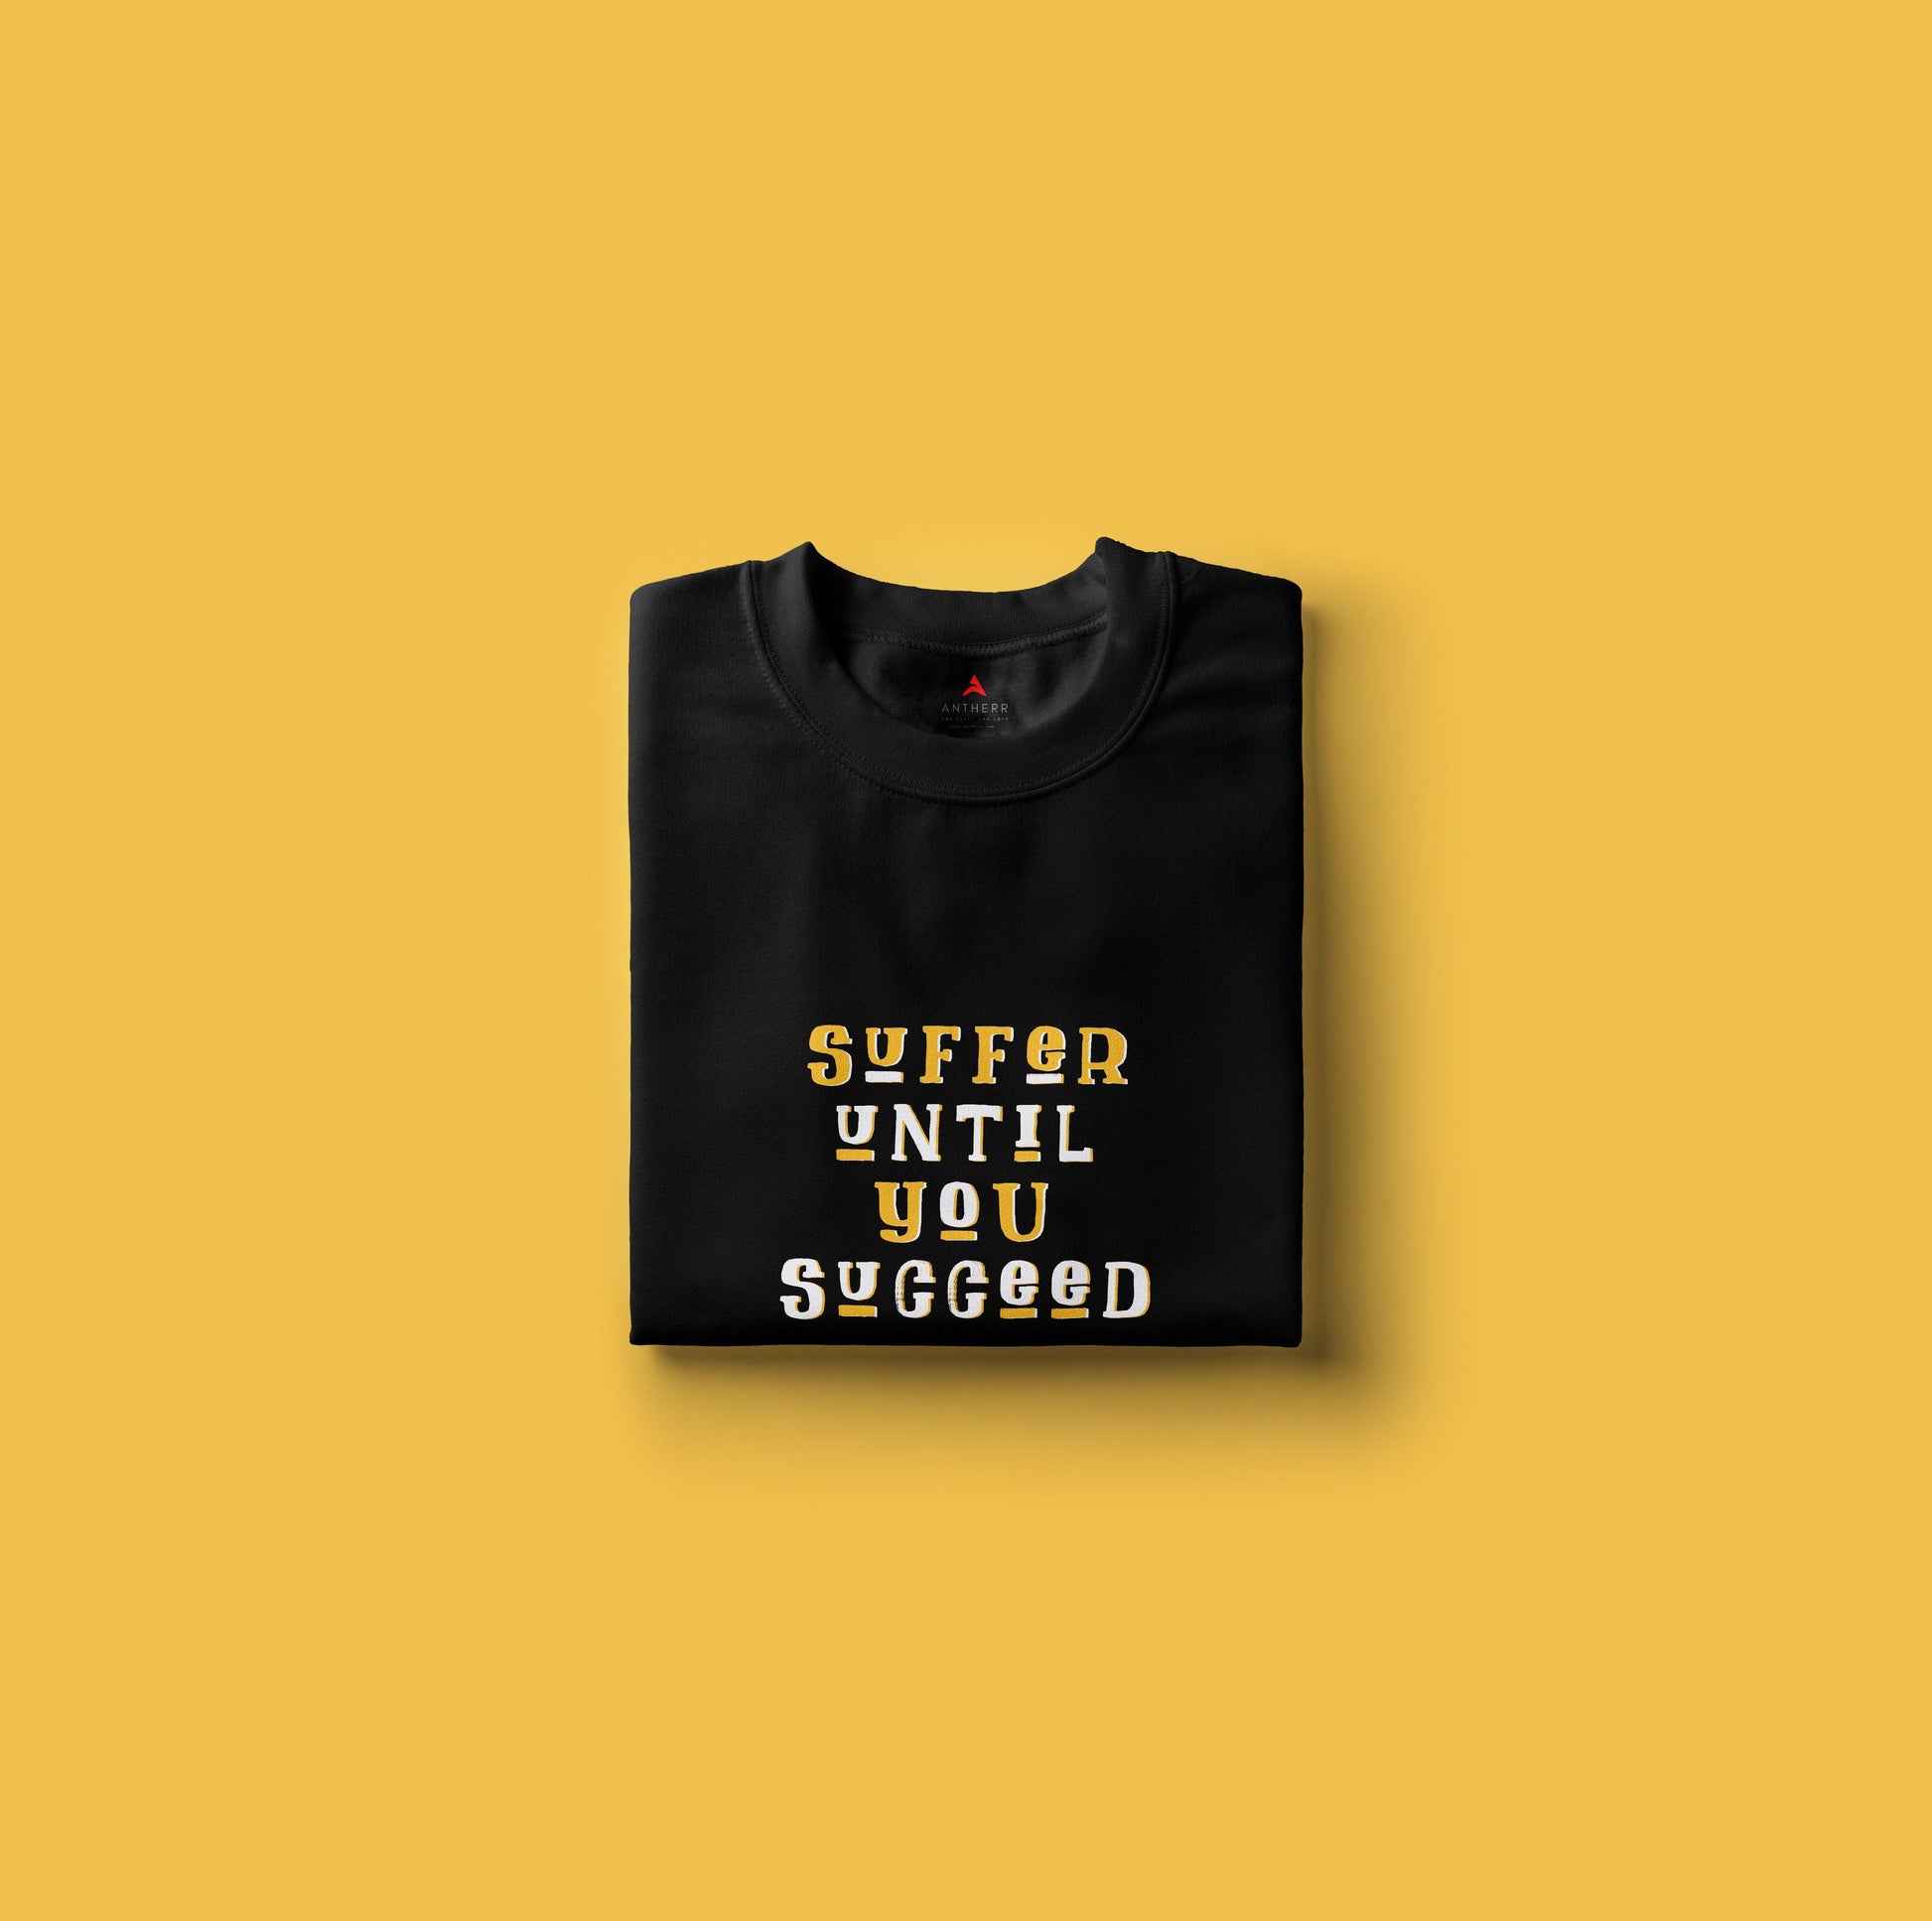 " SUFFER UNTIL YOU SUCCEED " HALF-SLEEVE T-SHIRTS